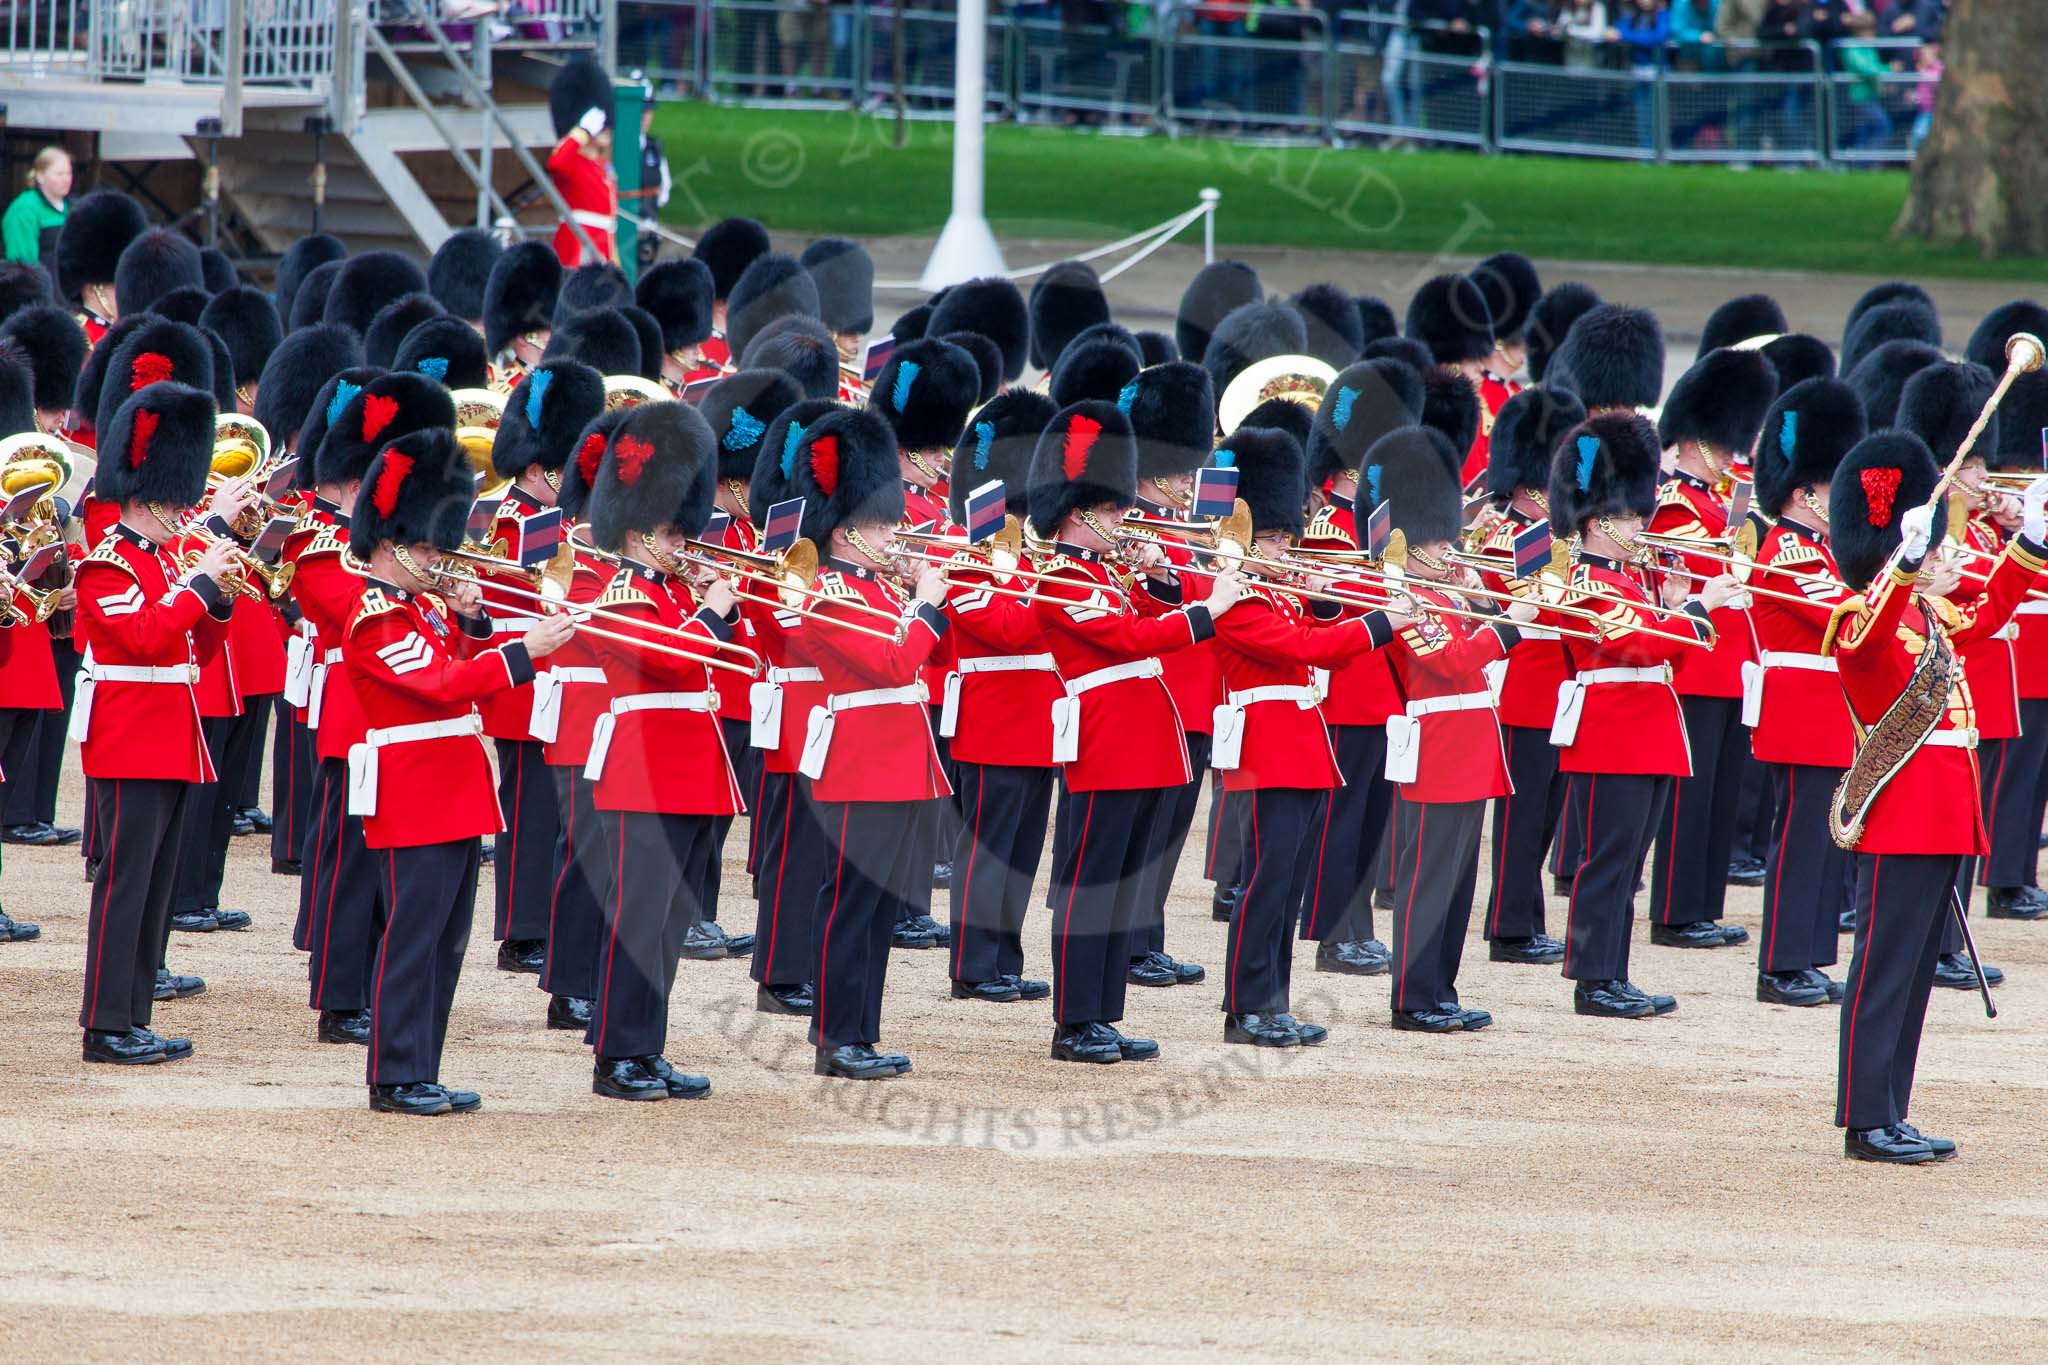 Major General's Review 2013: The Massed Bands, led by the five Drum Majors, during the March Past..
Horse Guards Parade, Westminster,
London SW1,

United Kingdom,
on 01 June 2013 at 11:25, image #441